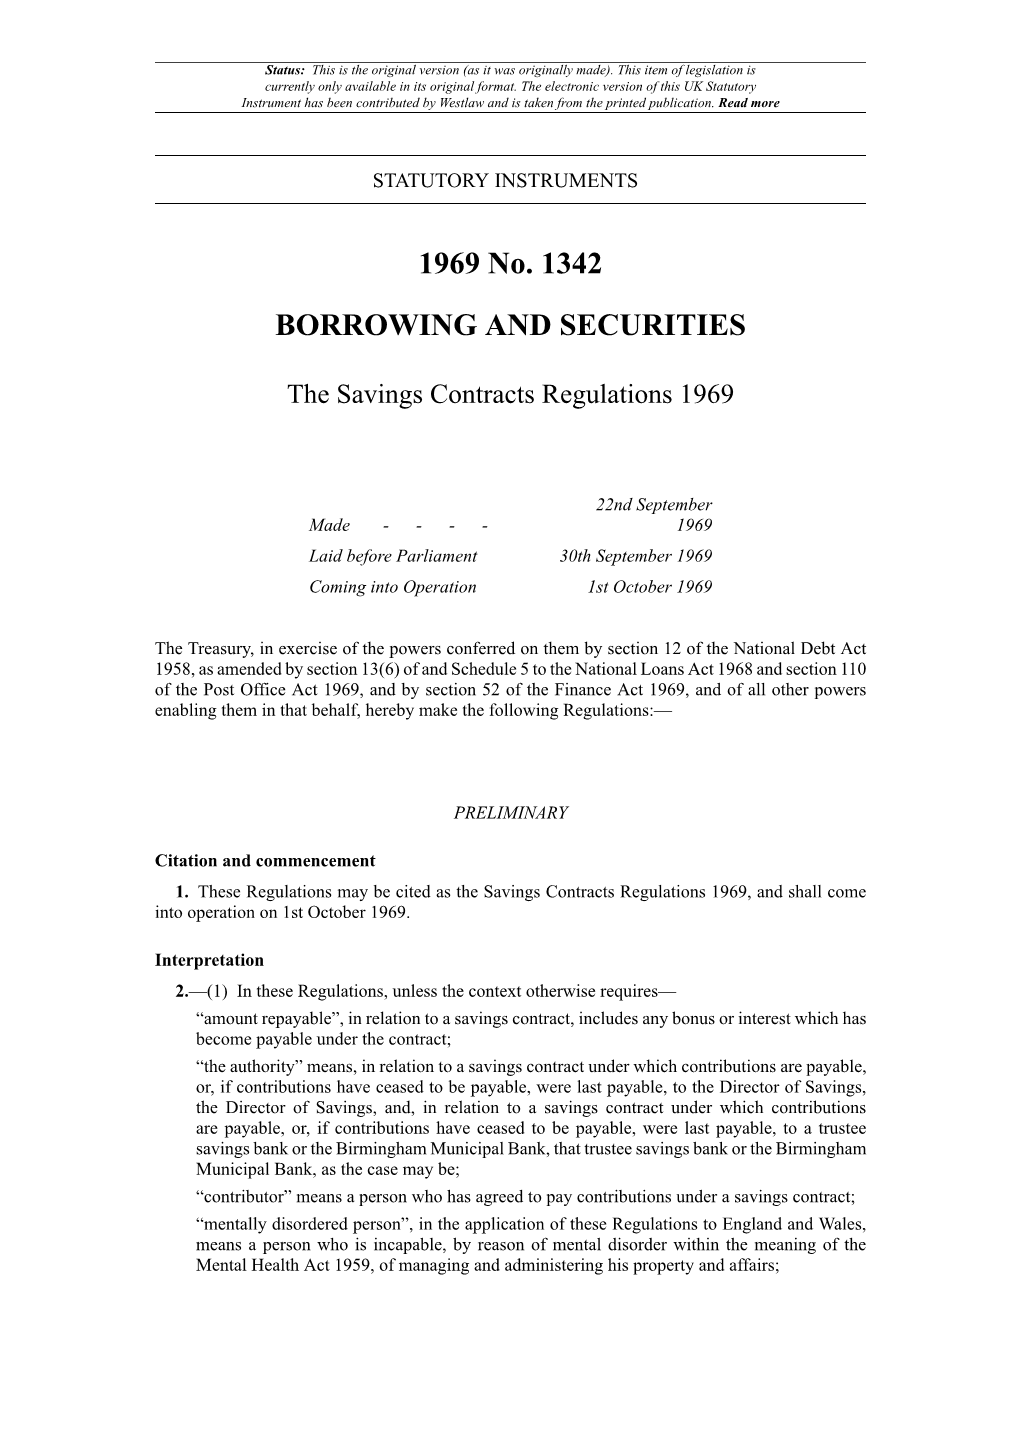 The Savings Contracts Regulations 1969